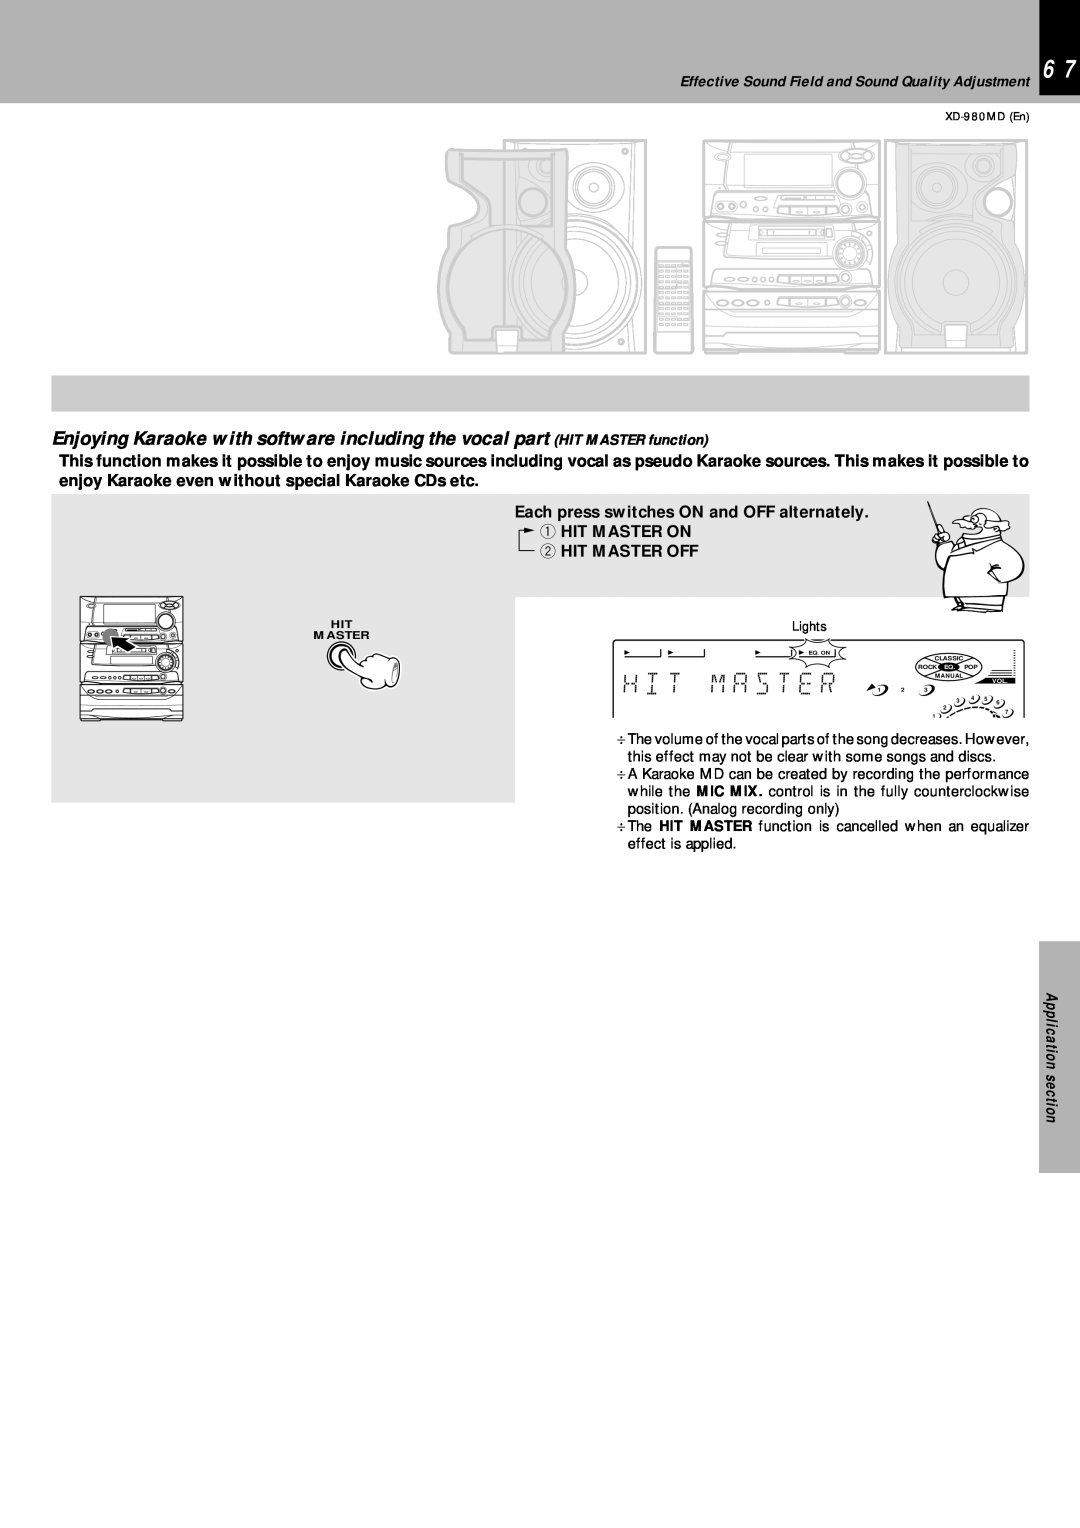 Kenwood XD-980MD instruction manual H I T M A s TE R 